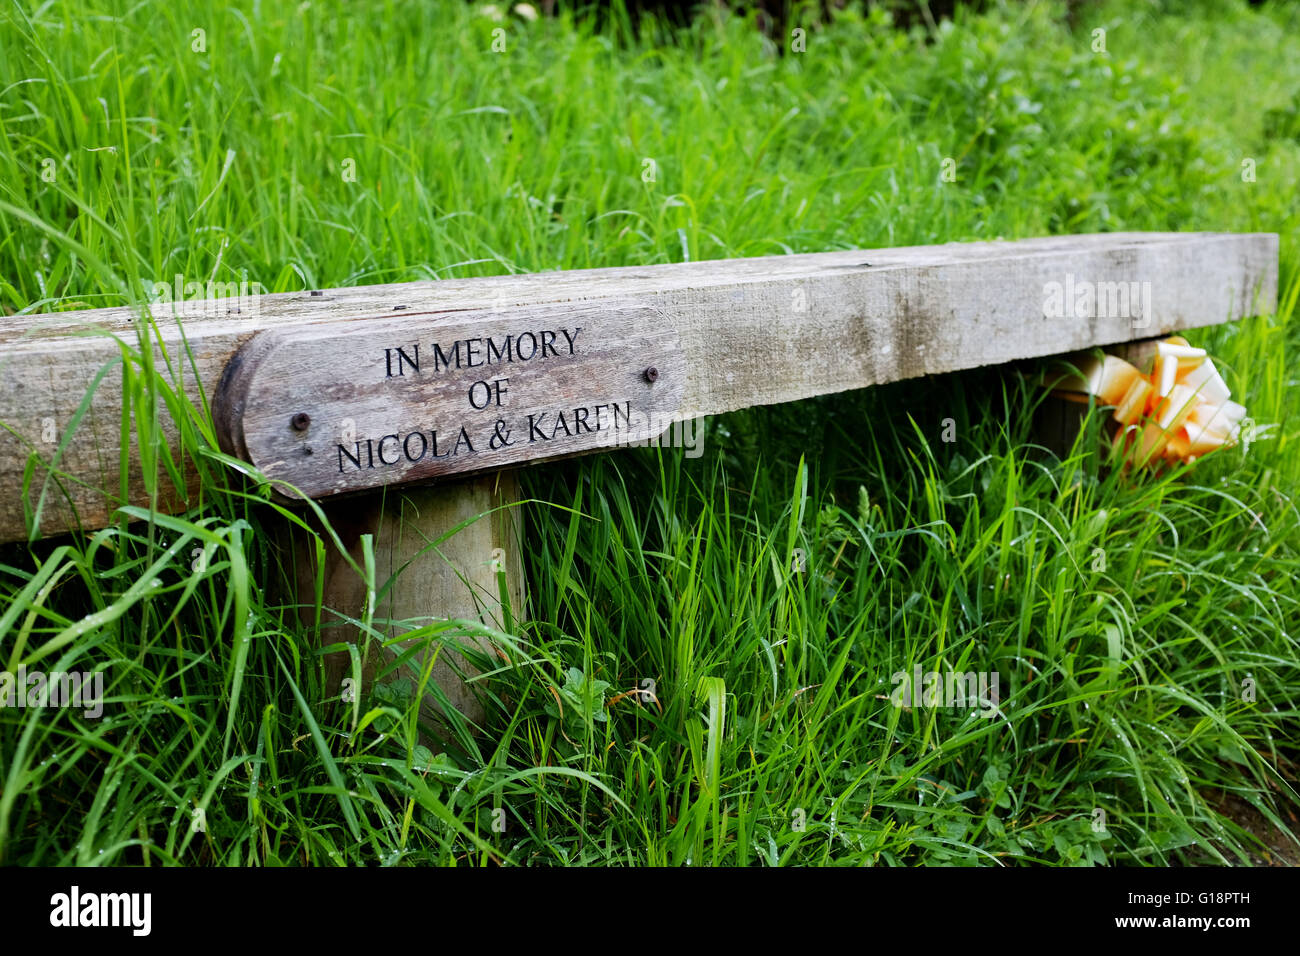 Brighton, UK. 11th May, 2016. The memorial tree at Wild Park in Brighton where the bodies of murdered schoolgirls Nicola Fellows and Karen Hadaway were discovered almost 30 years ago . A man was arrested yesterday in connection with what became known as The Babes in the Wood Murders  © Simon Dack/Alamy Live News  Credit:  Simon Dack/Alamy Live News Stock Photo